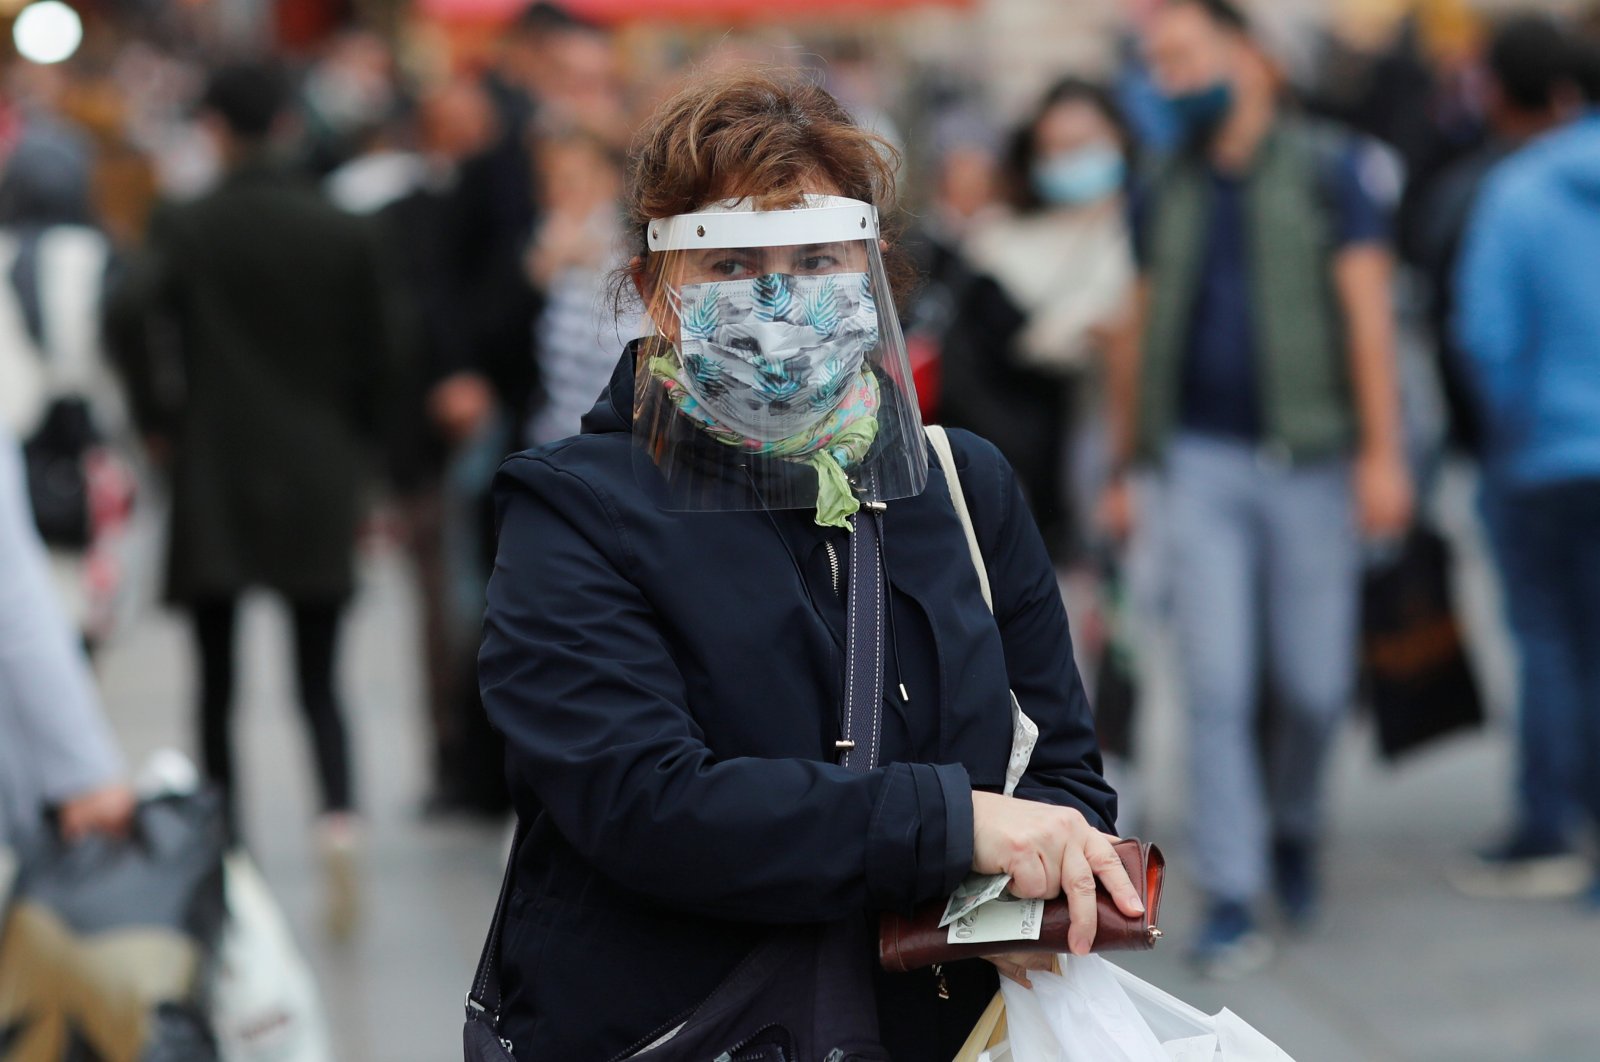 A woman wearing a protective mask and a face shield shops at a market amid the outbreak of COVID-19, in Istanbul, Turkey, Oct. 20, 2020. REUTERS/Murad Sezer